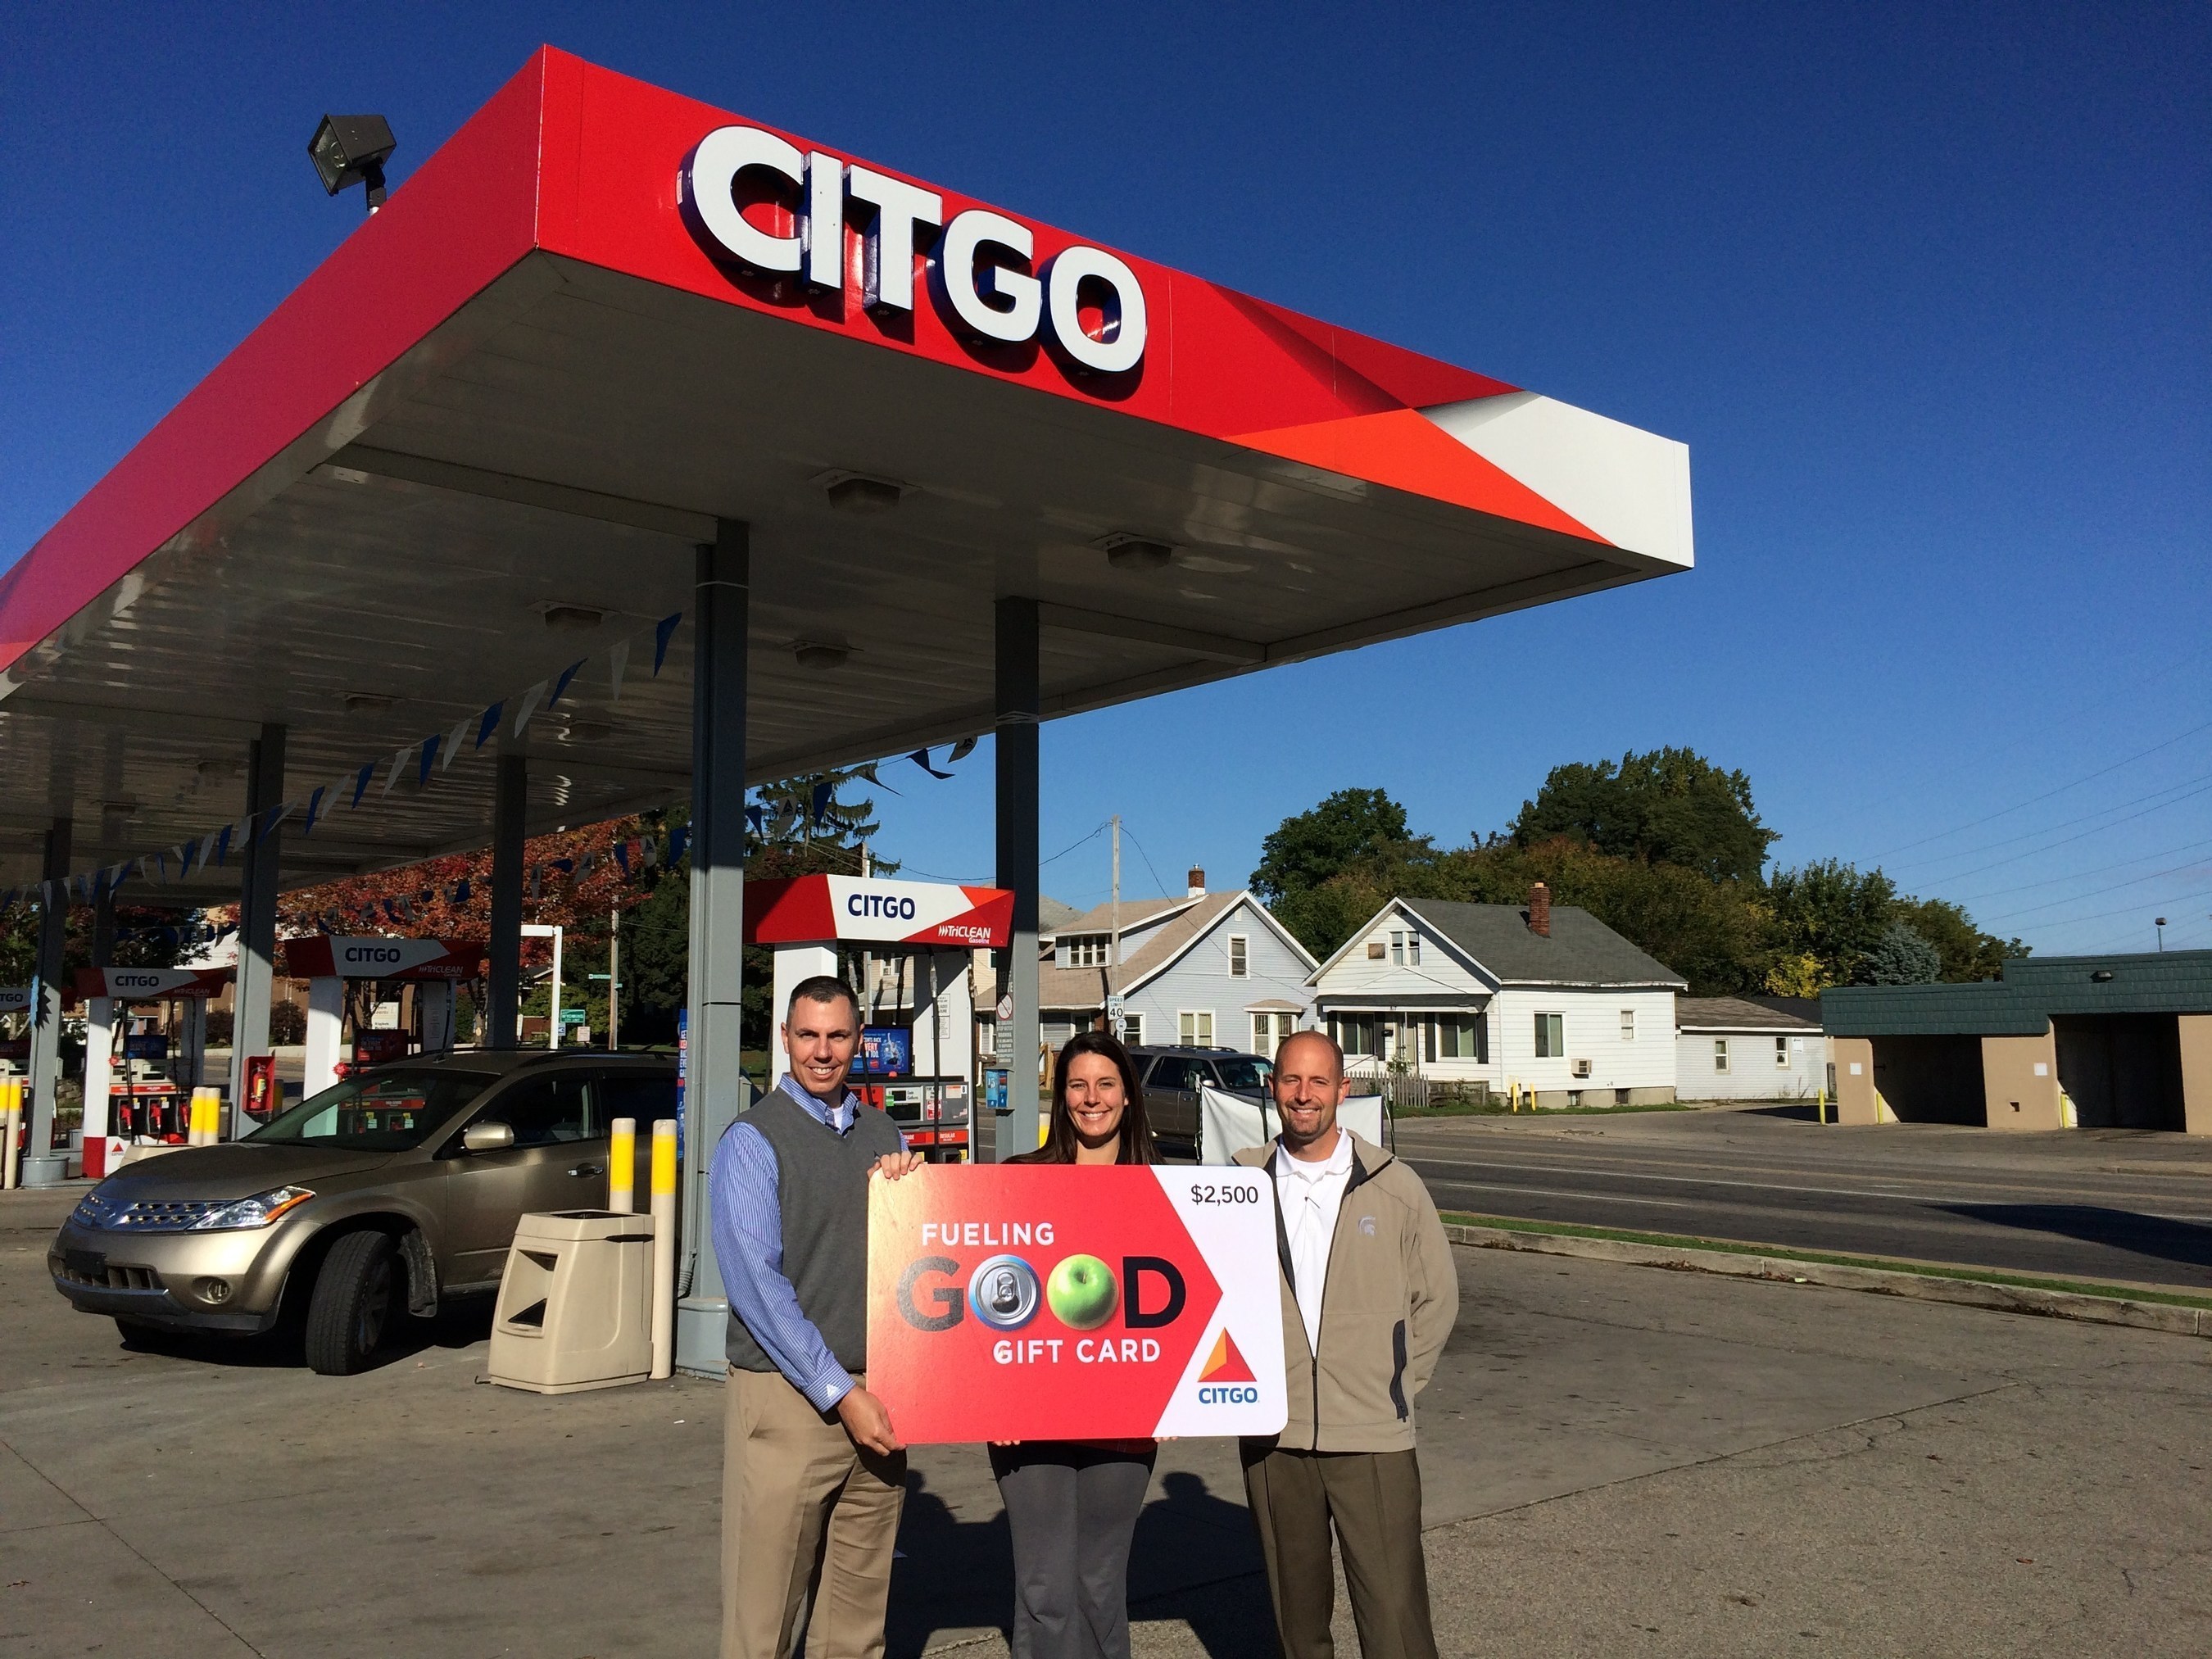 local-citgo-marketers-in-michigan-support-customer-loyalty-with-good